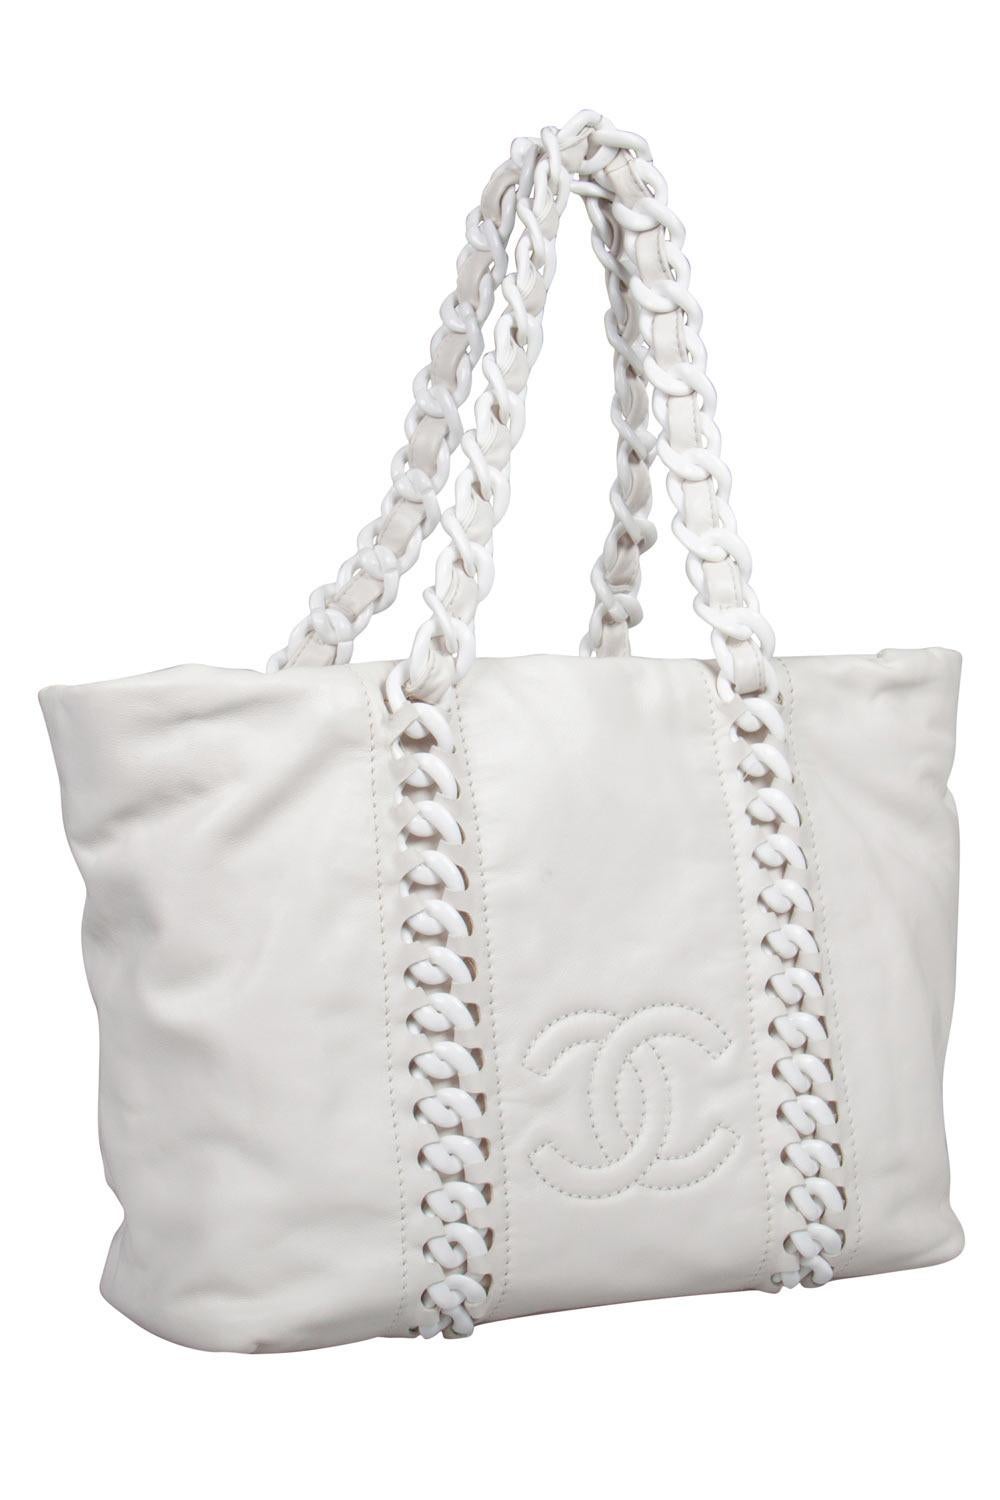 Gray Chanel White Leather Modern Chain Rhodoid Tote